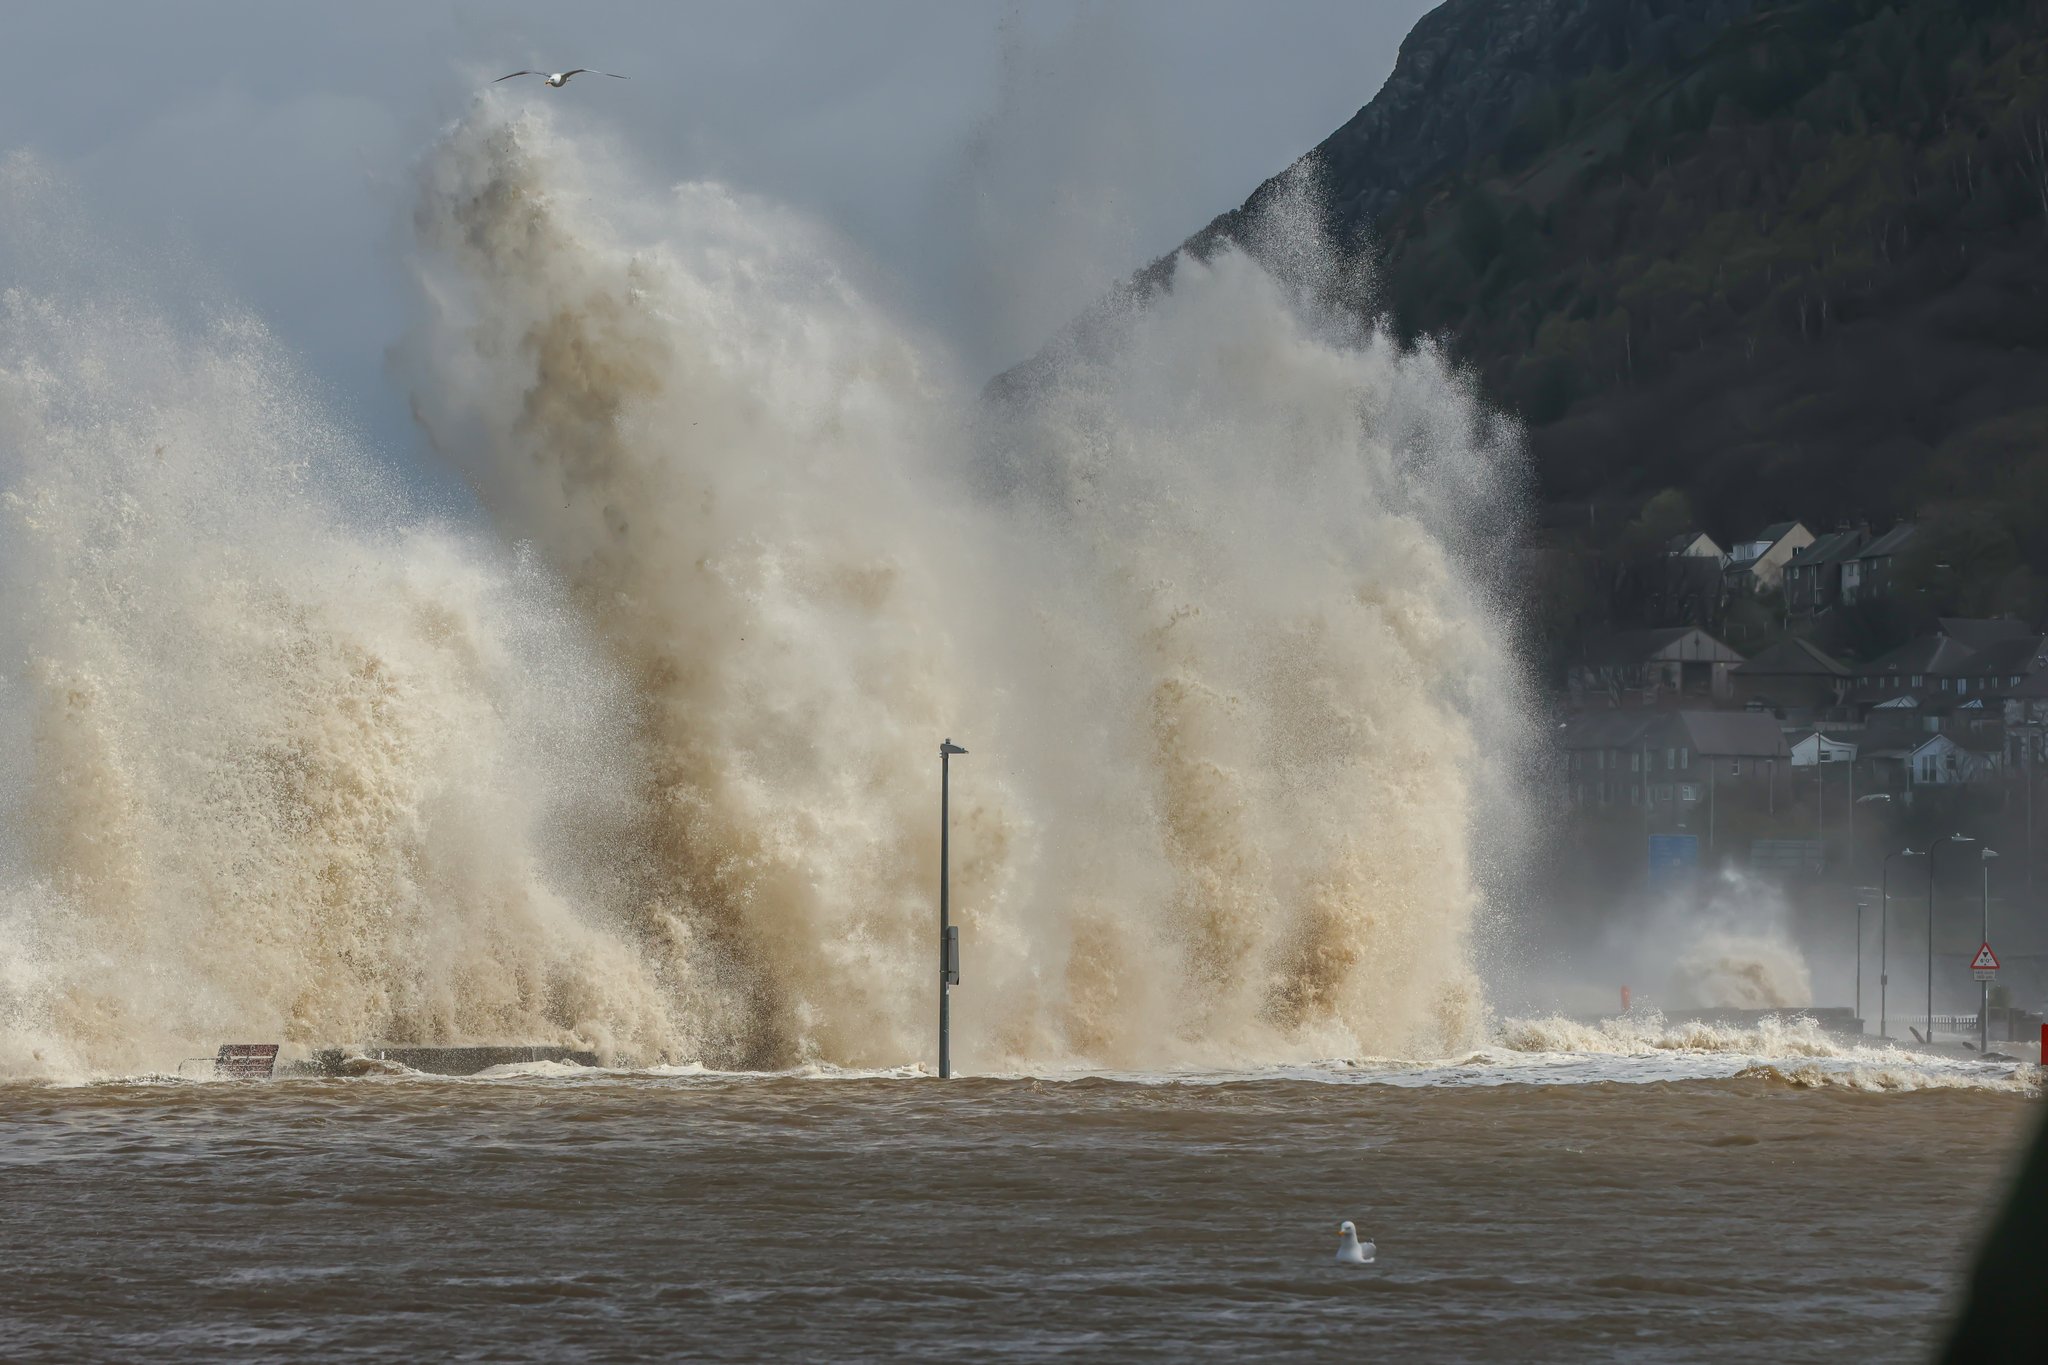 Storm Pierrick causes flooding in North Wales - Chaos, evacuations and closures